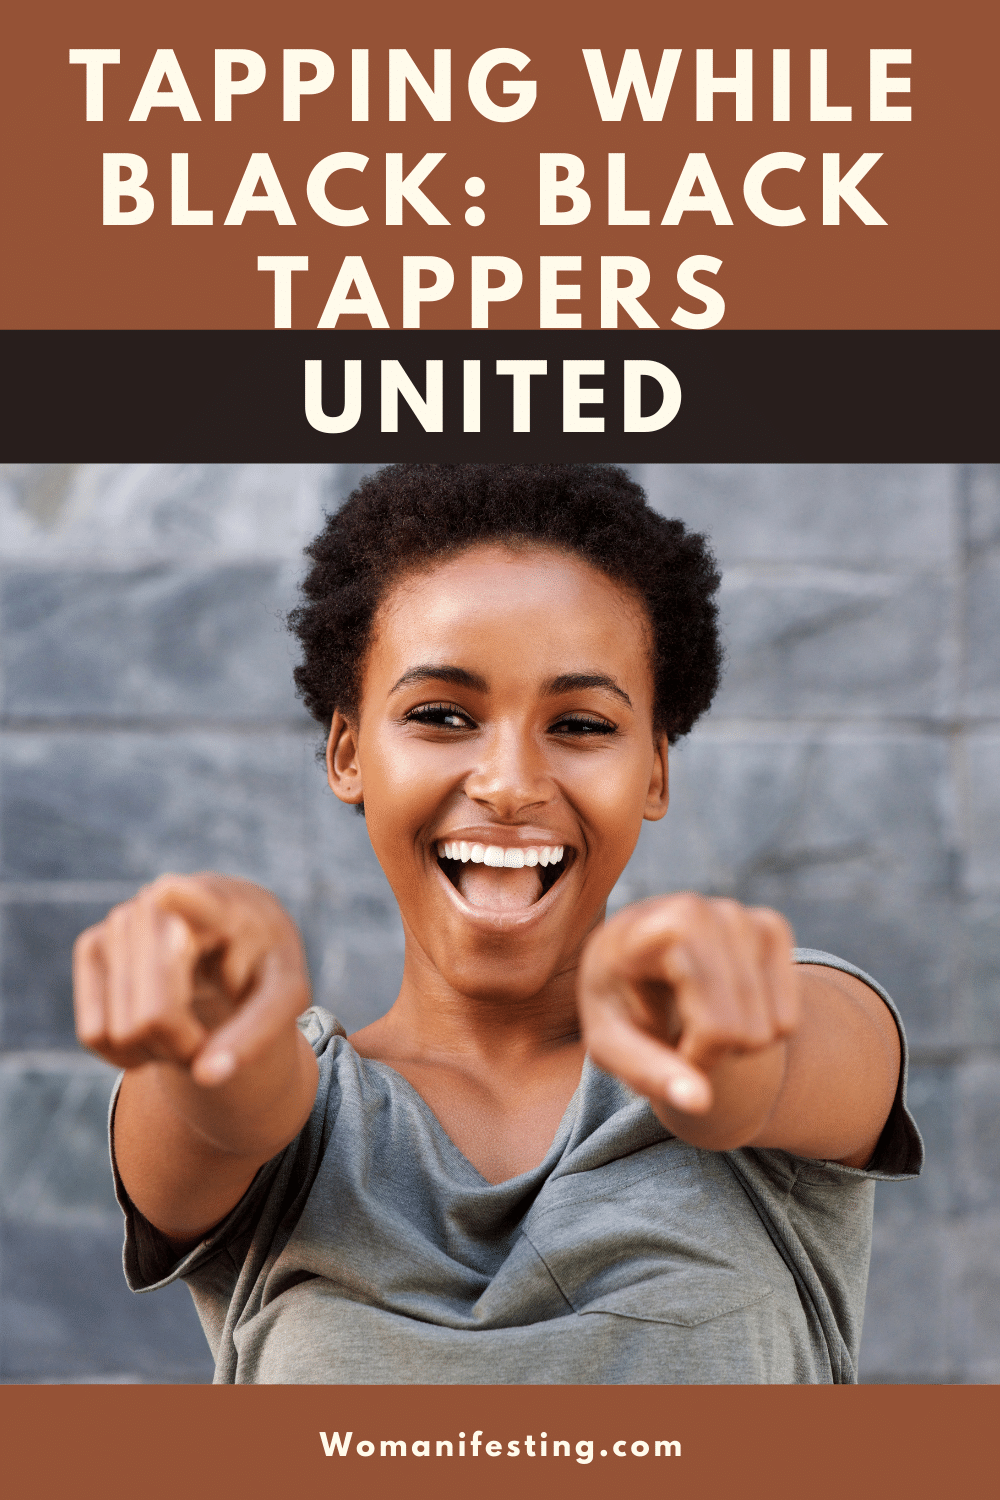 Tapping While Black - Black Tappers United